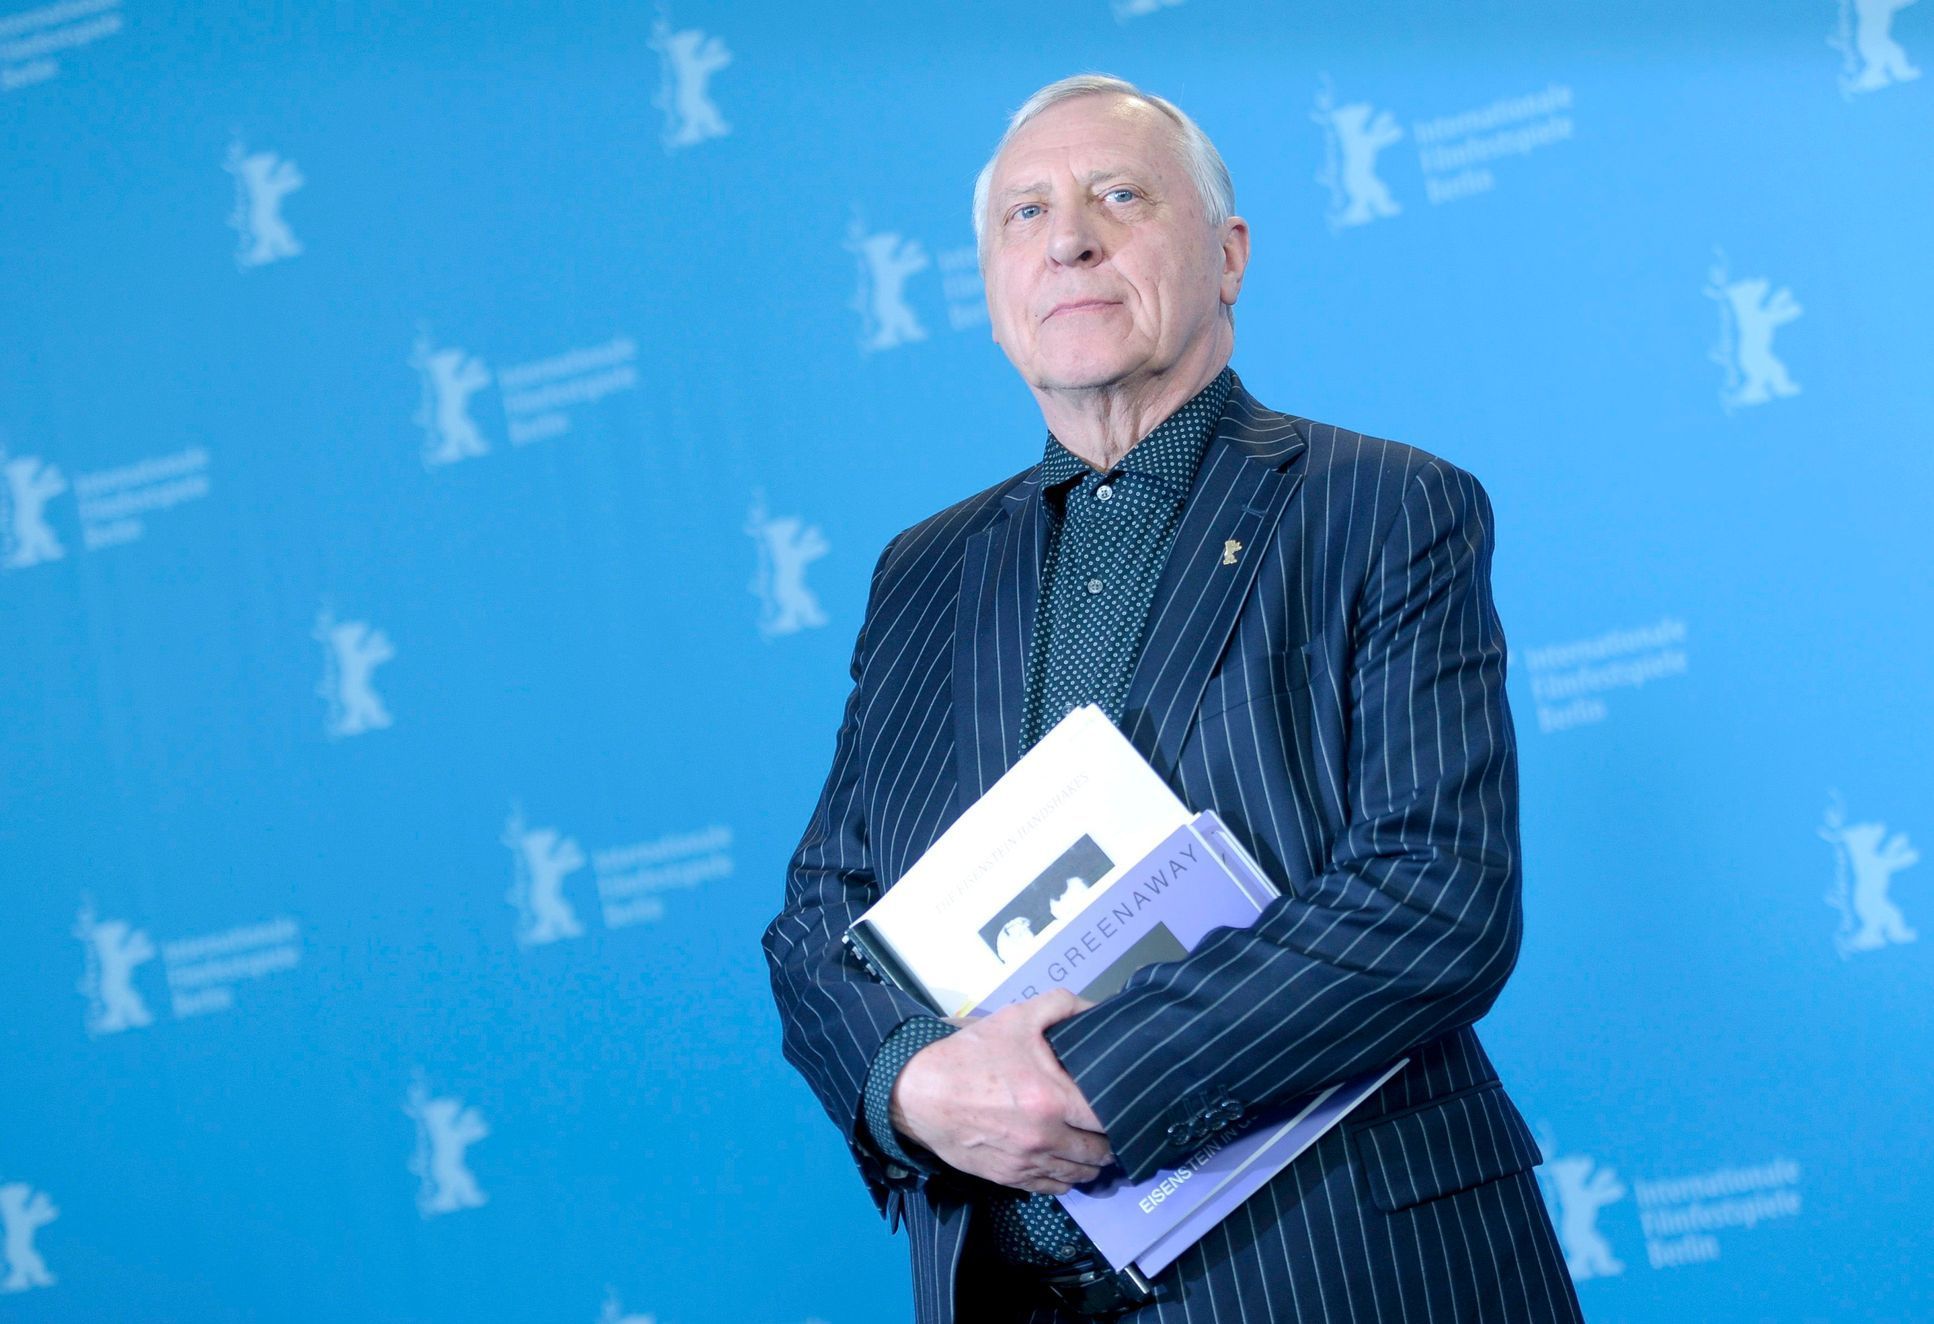 Director Greenaway poses during photocall at 65th Berlinale International Film Festival in Berlin